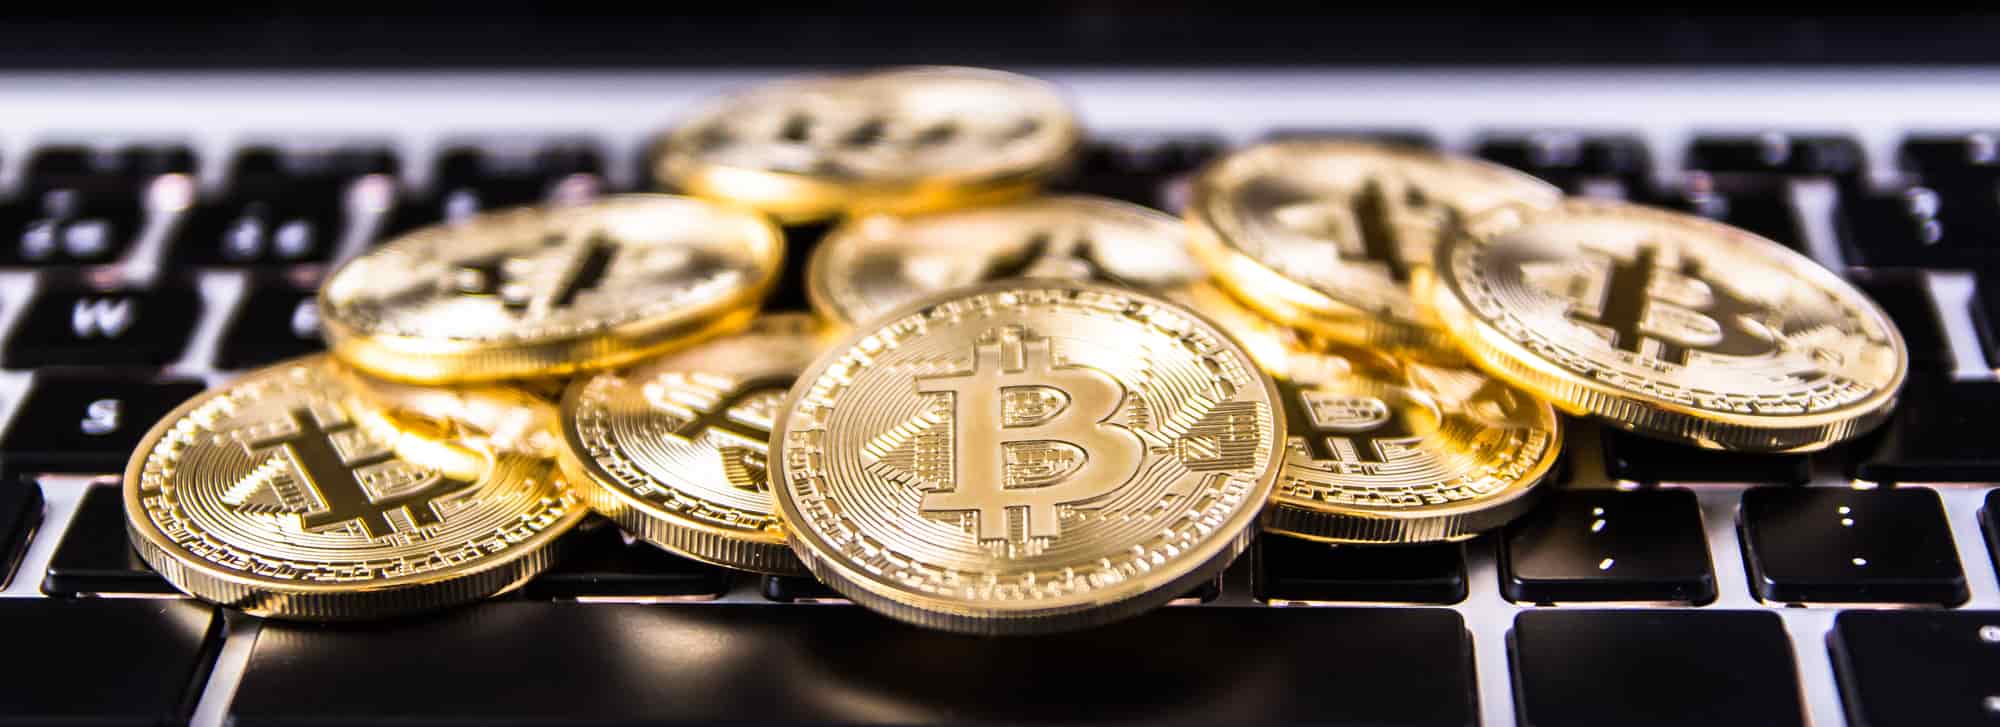 How to Invest in Bitcoin: Buying for Beginners - NerdWallet UK